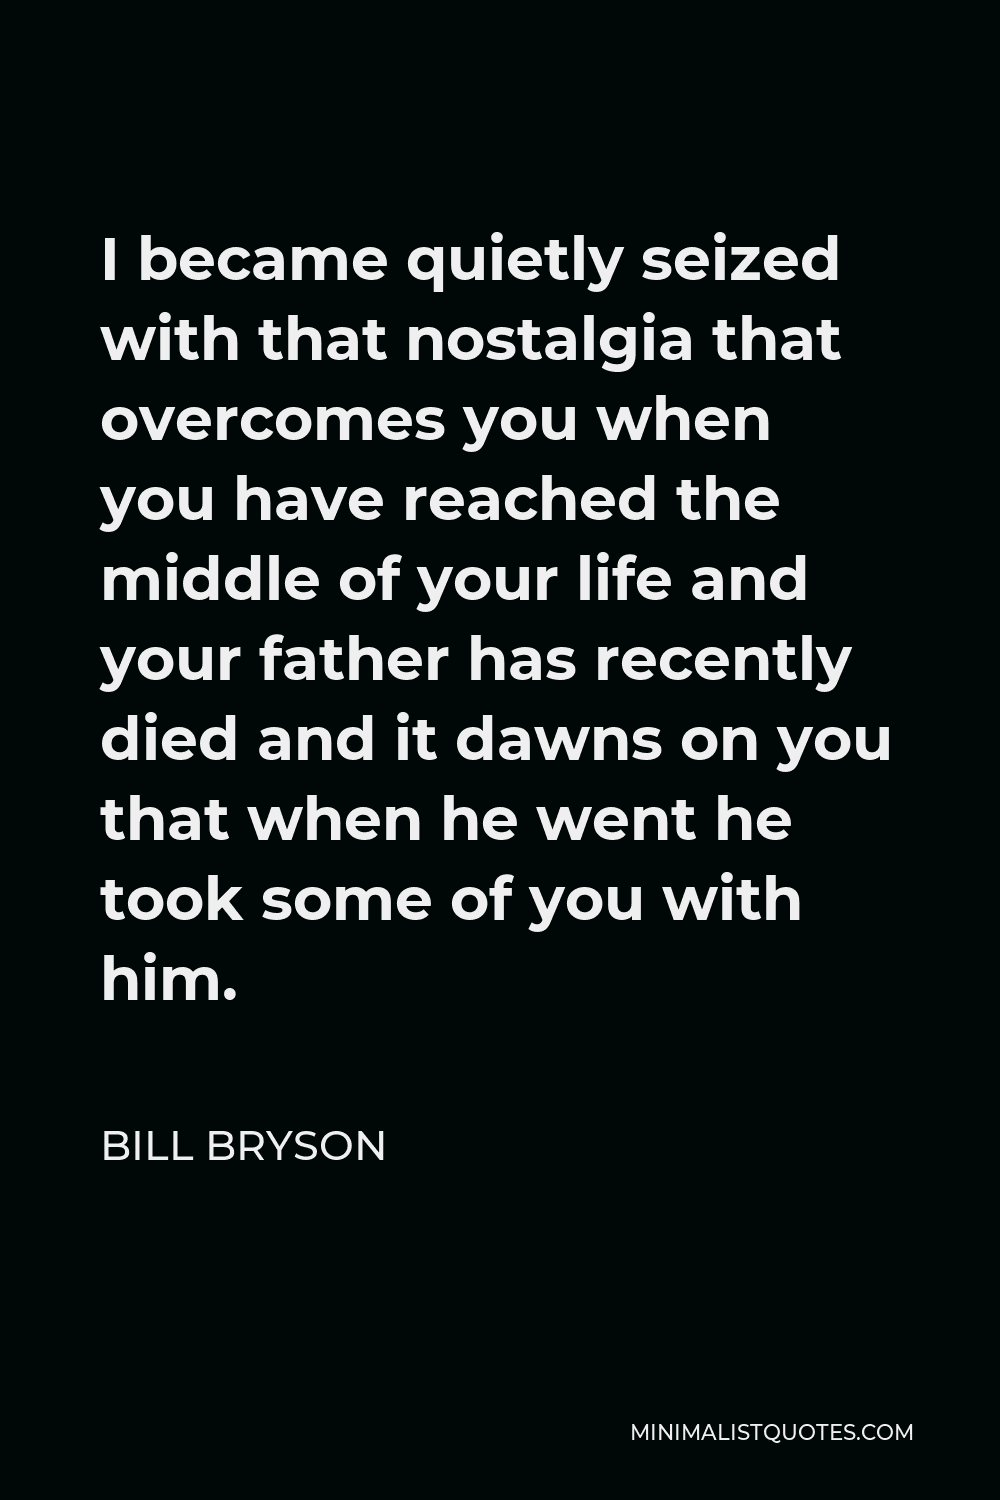 Bill Bryson Quote - I became quietly seized with that nostalgia that overcomes you when you have reached the middle of your life and your father has recently died and it dawns on you that when he went he took some of you with him.